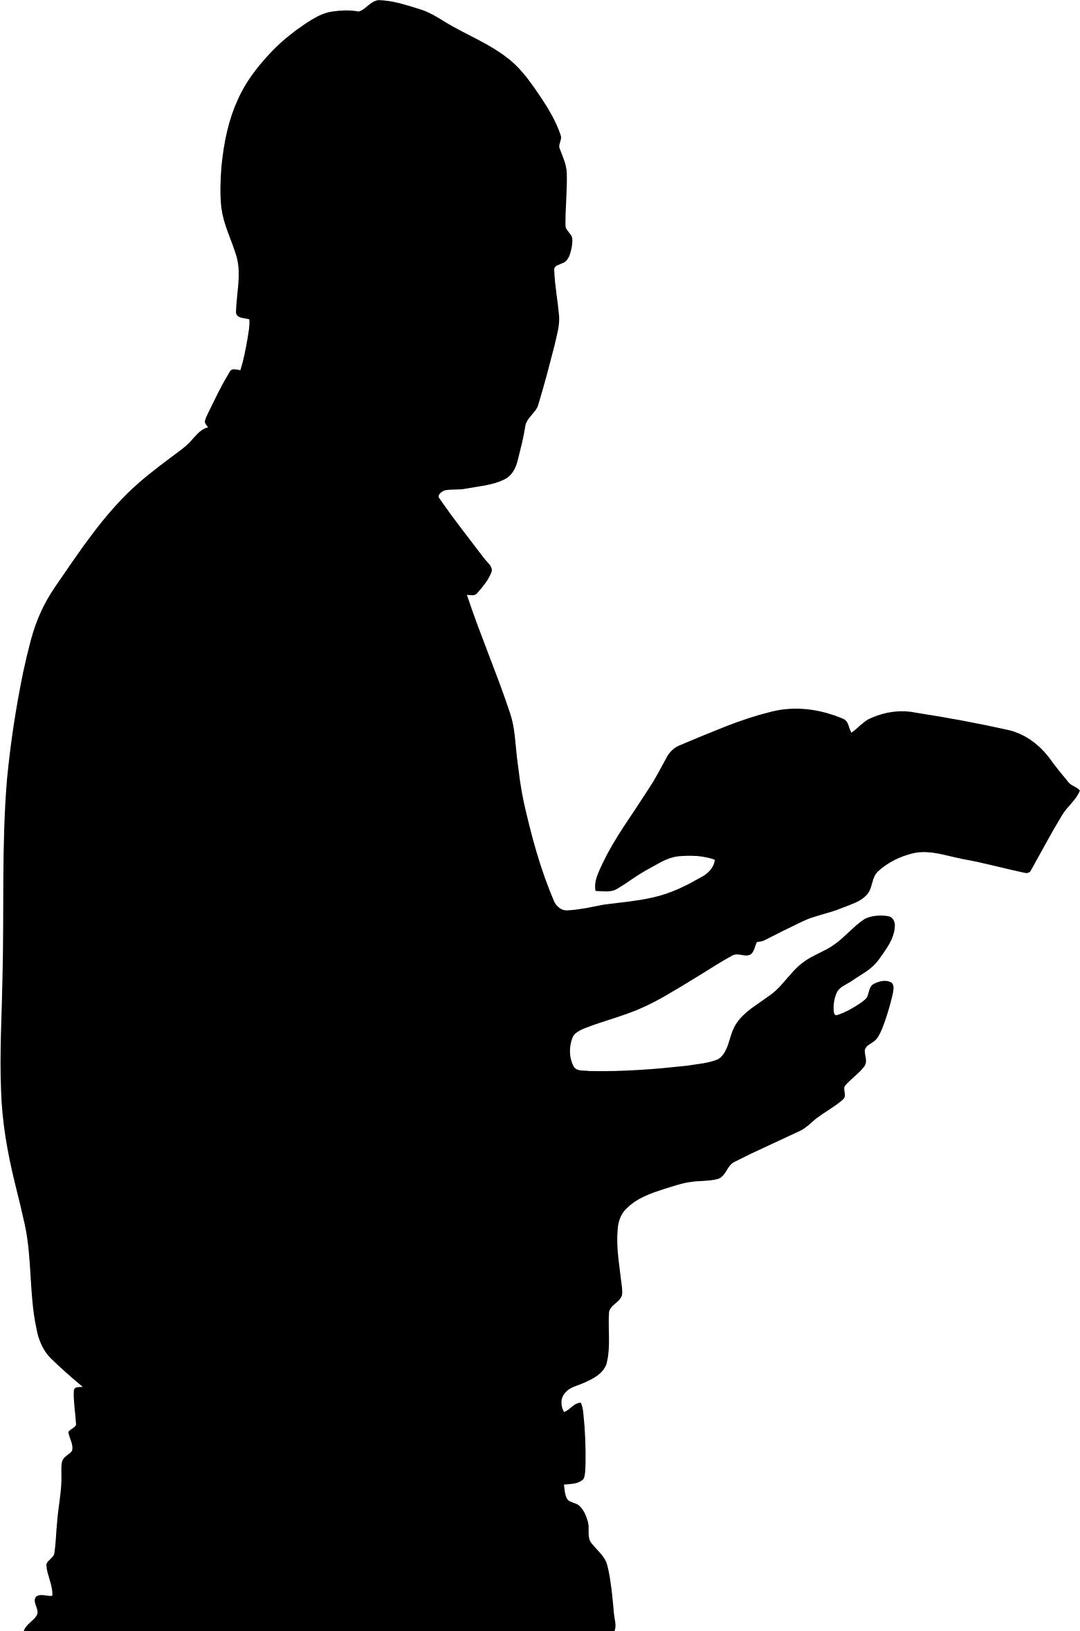 Man With Bible In Hand Silhouette png transparent